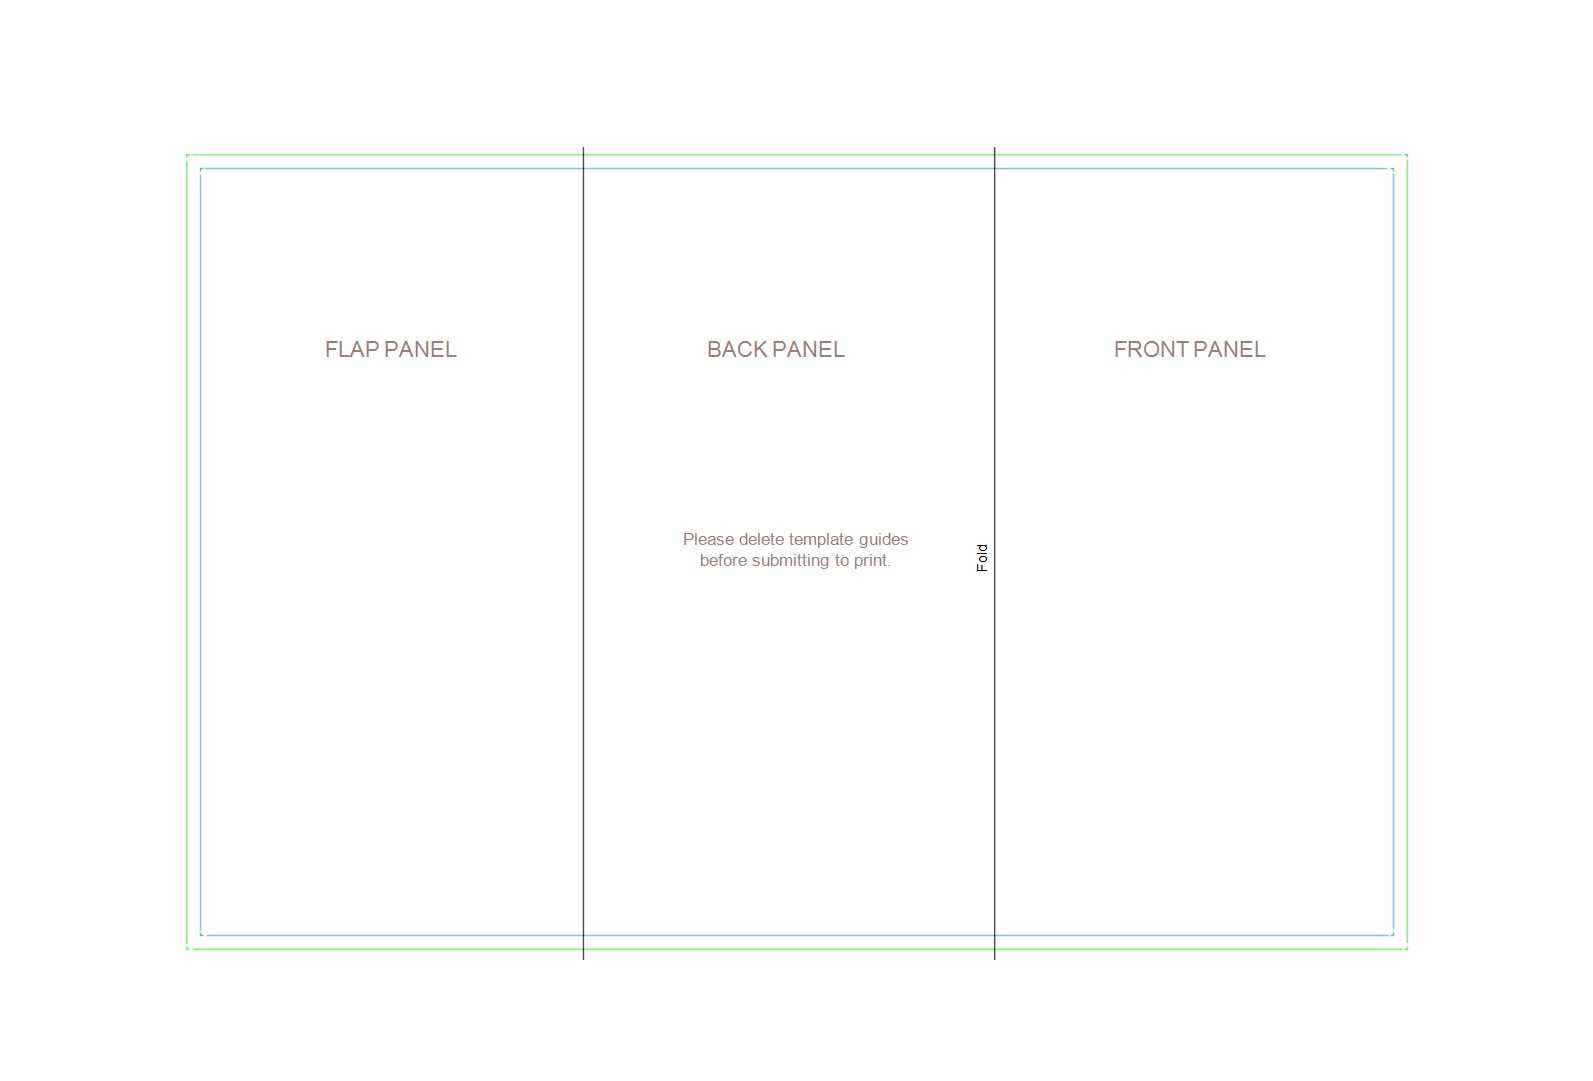 Pamphlet Template Docs - Dalep.midnightpig.co Pertaining To Google Doc Brochure Template